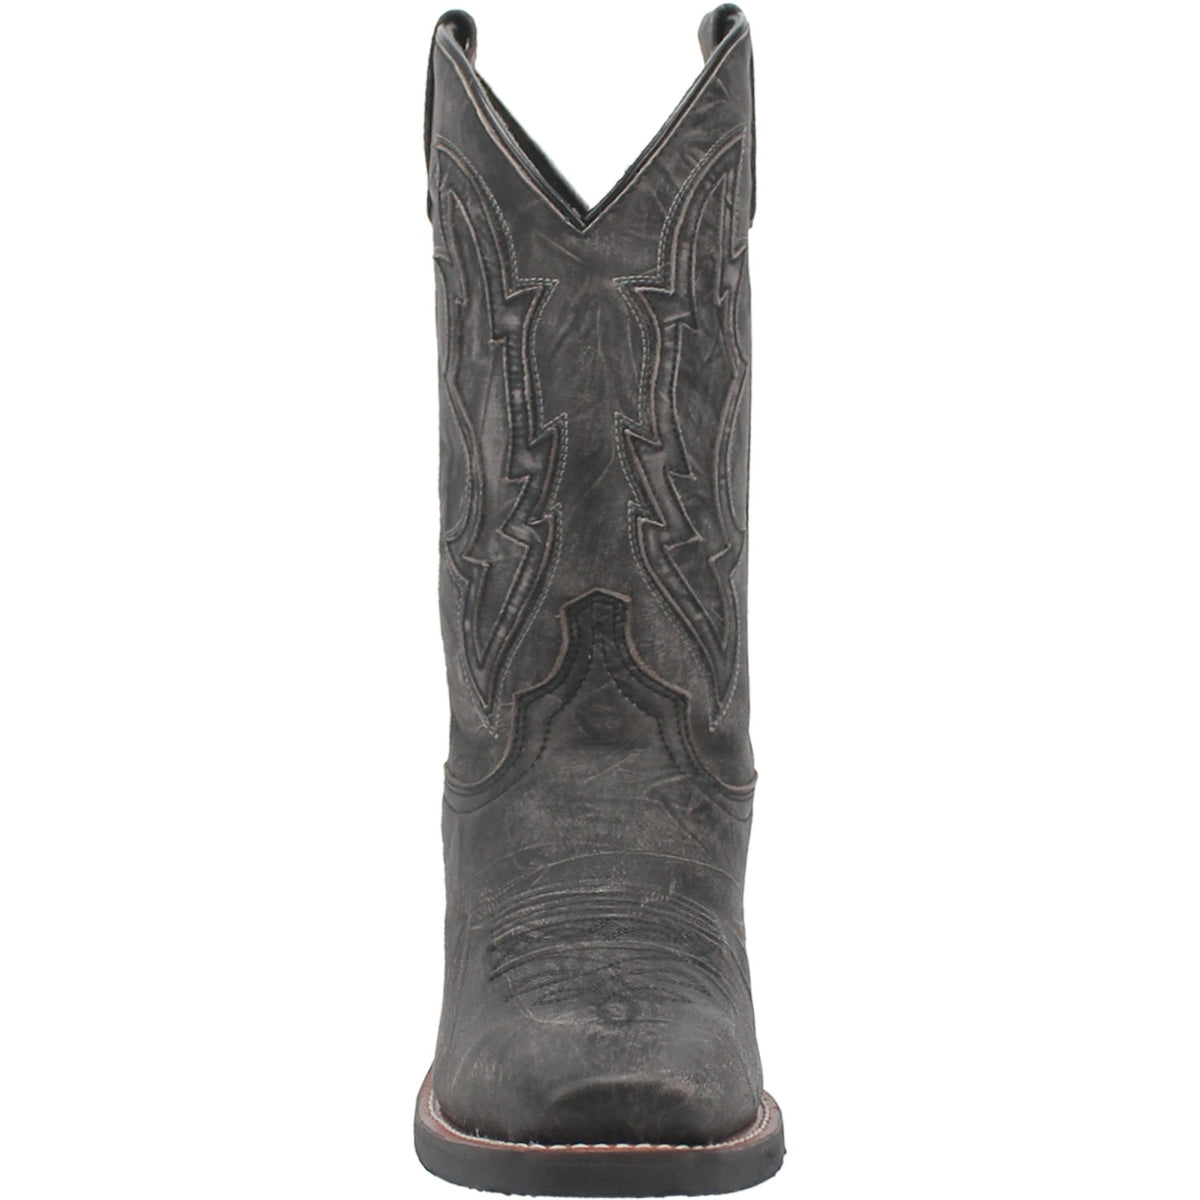 JESSCO LEATHER BOOT Cover